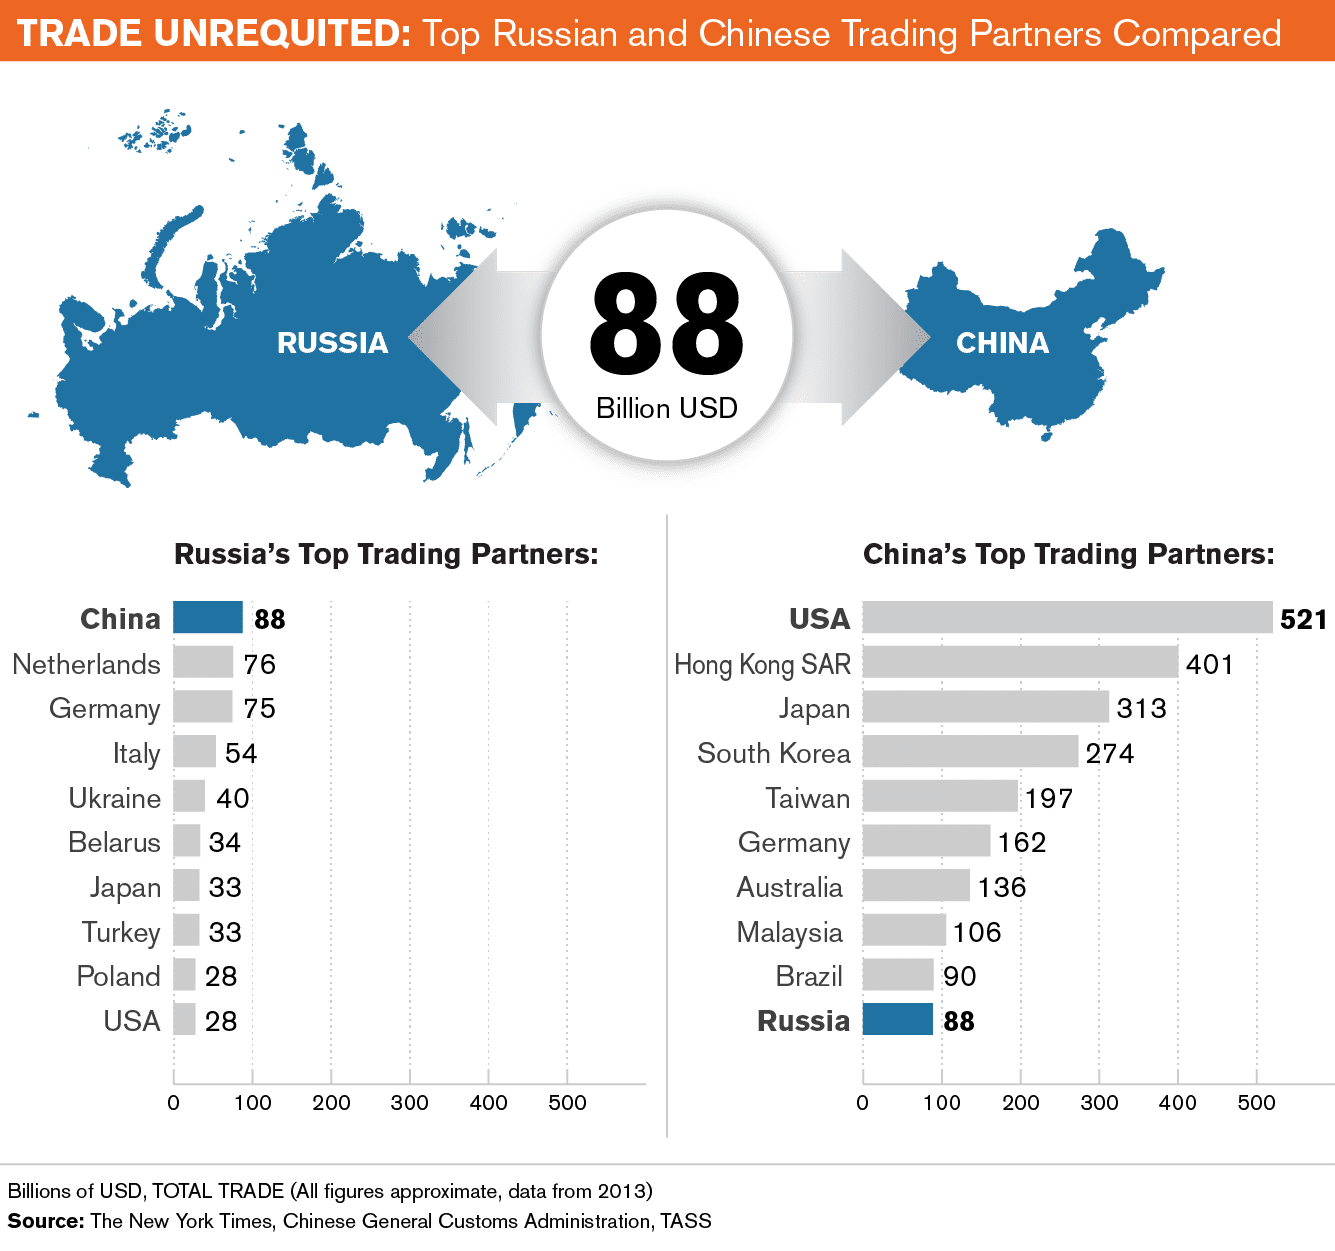 Top Russian and Chinese Trading Partners Compared